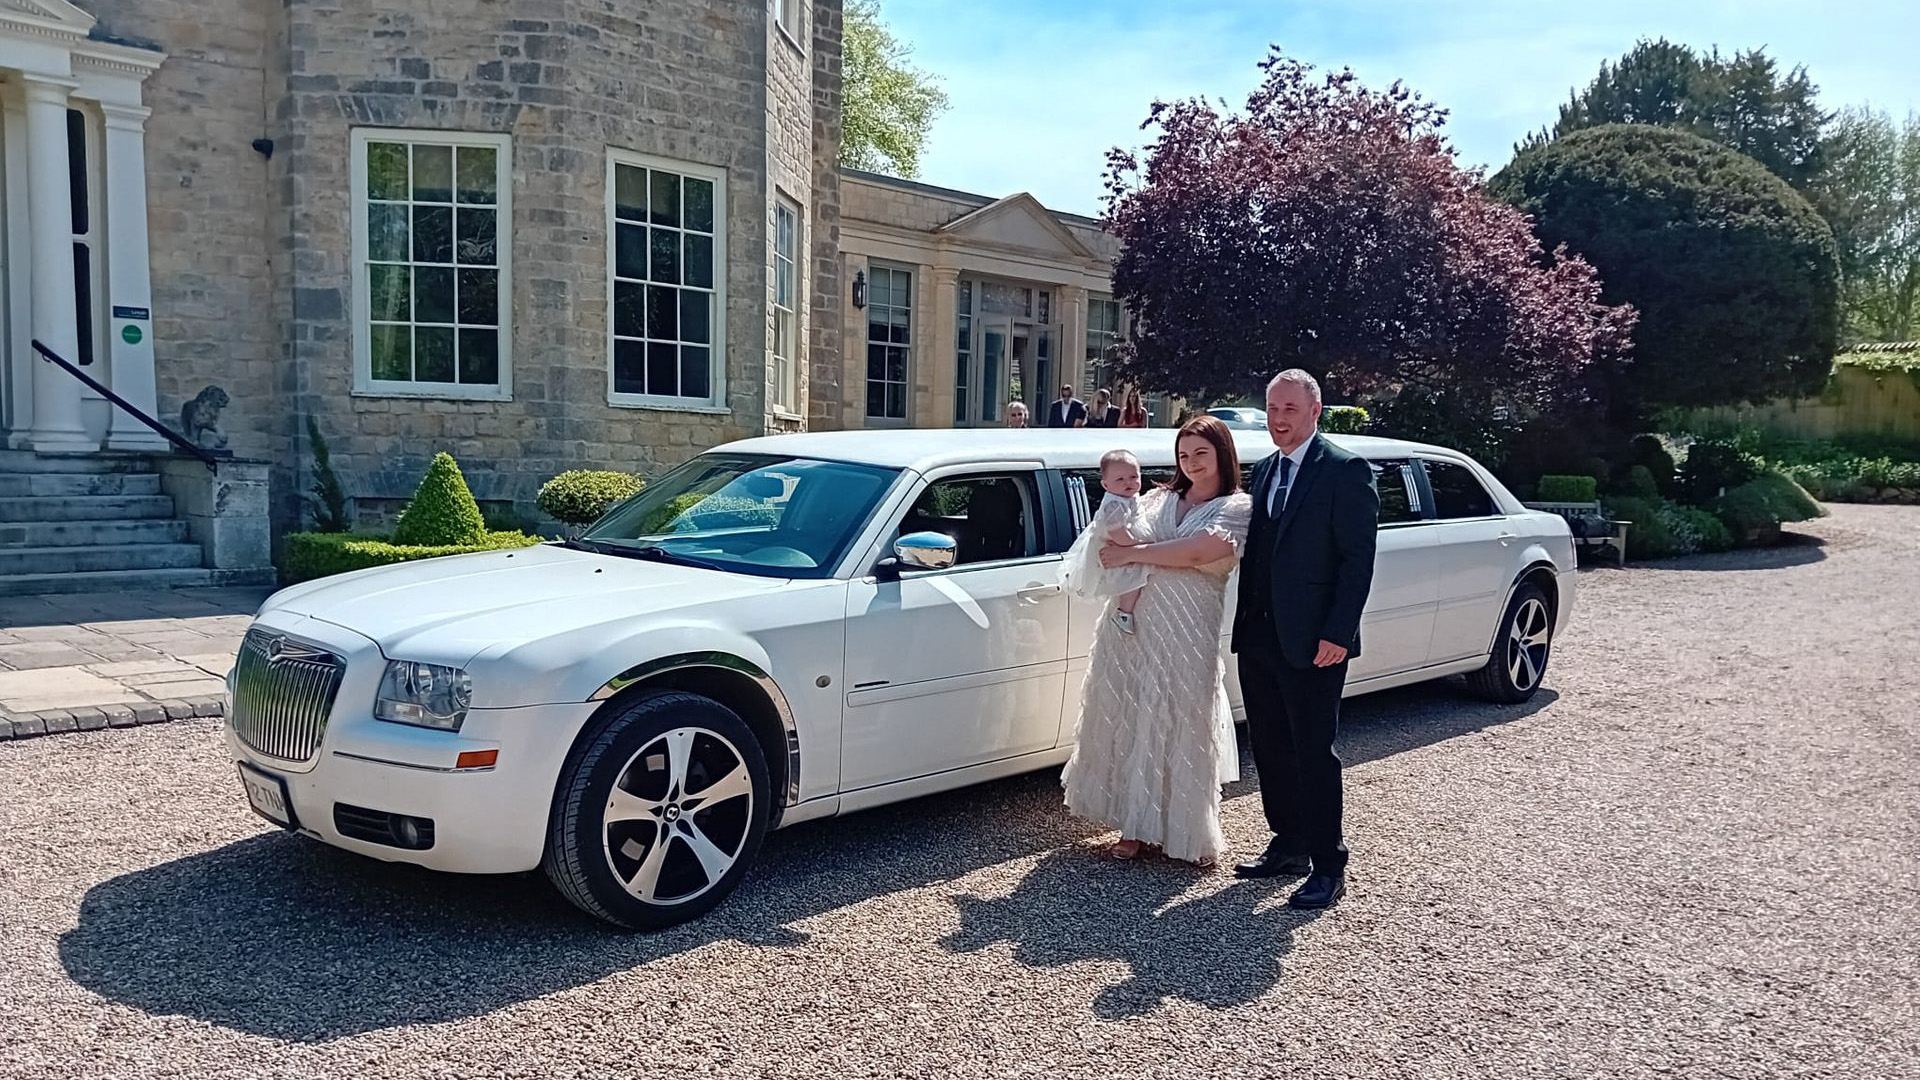 Chrysler 300c White Limo in front of a wedding venue with Bride and Groom standing by the vehicle. The Bride is holding her little infant baby in her arm.